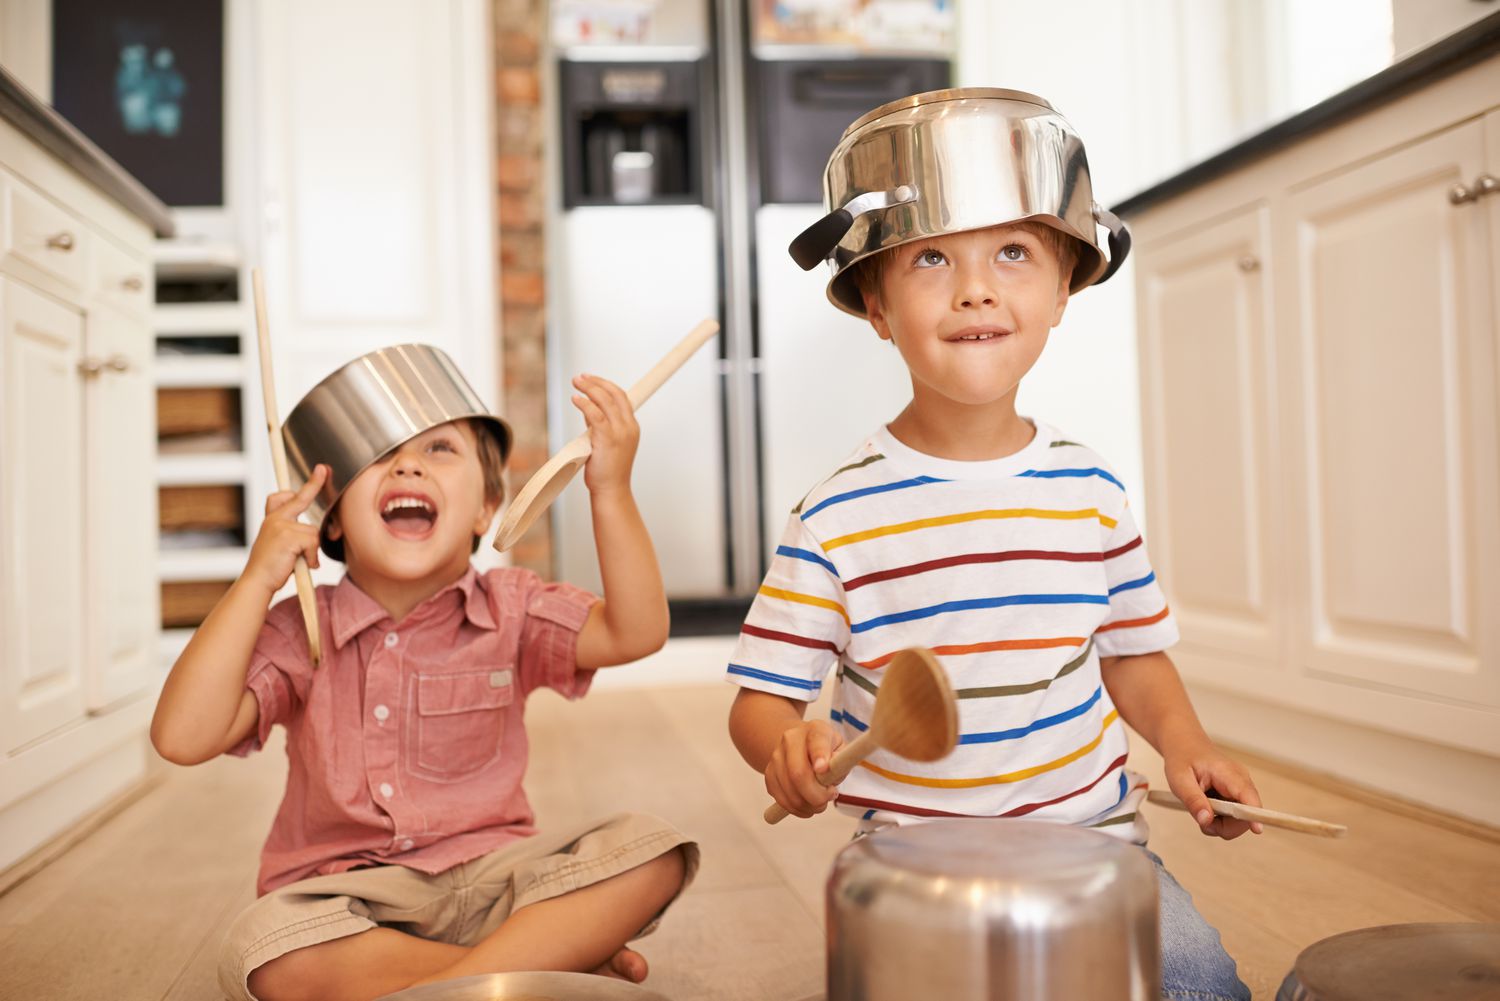 Two young boys joyfully playing with pots and pans, creating music and laughter. Help Your Neighbor